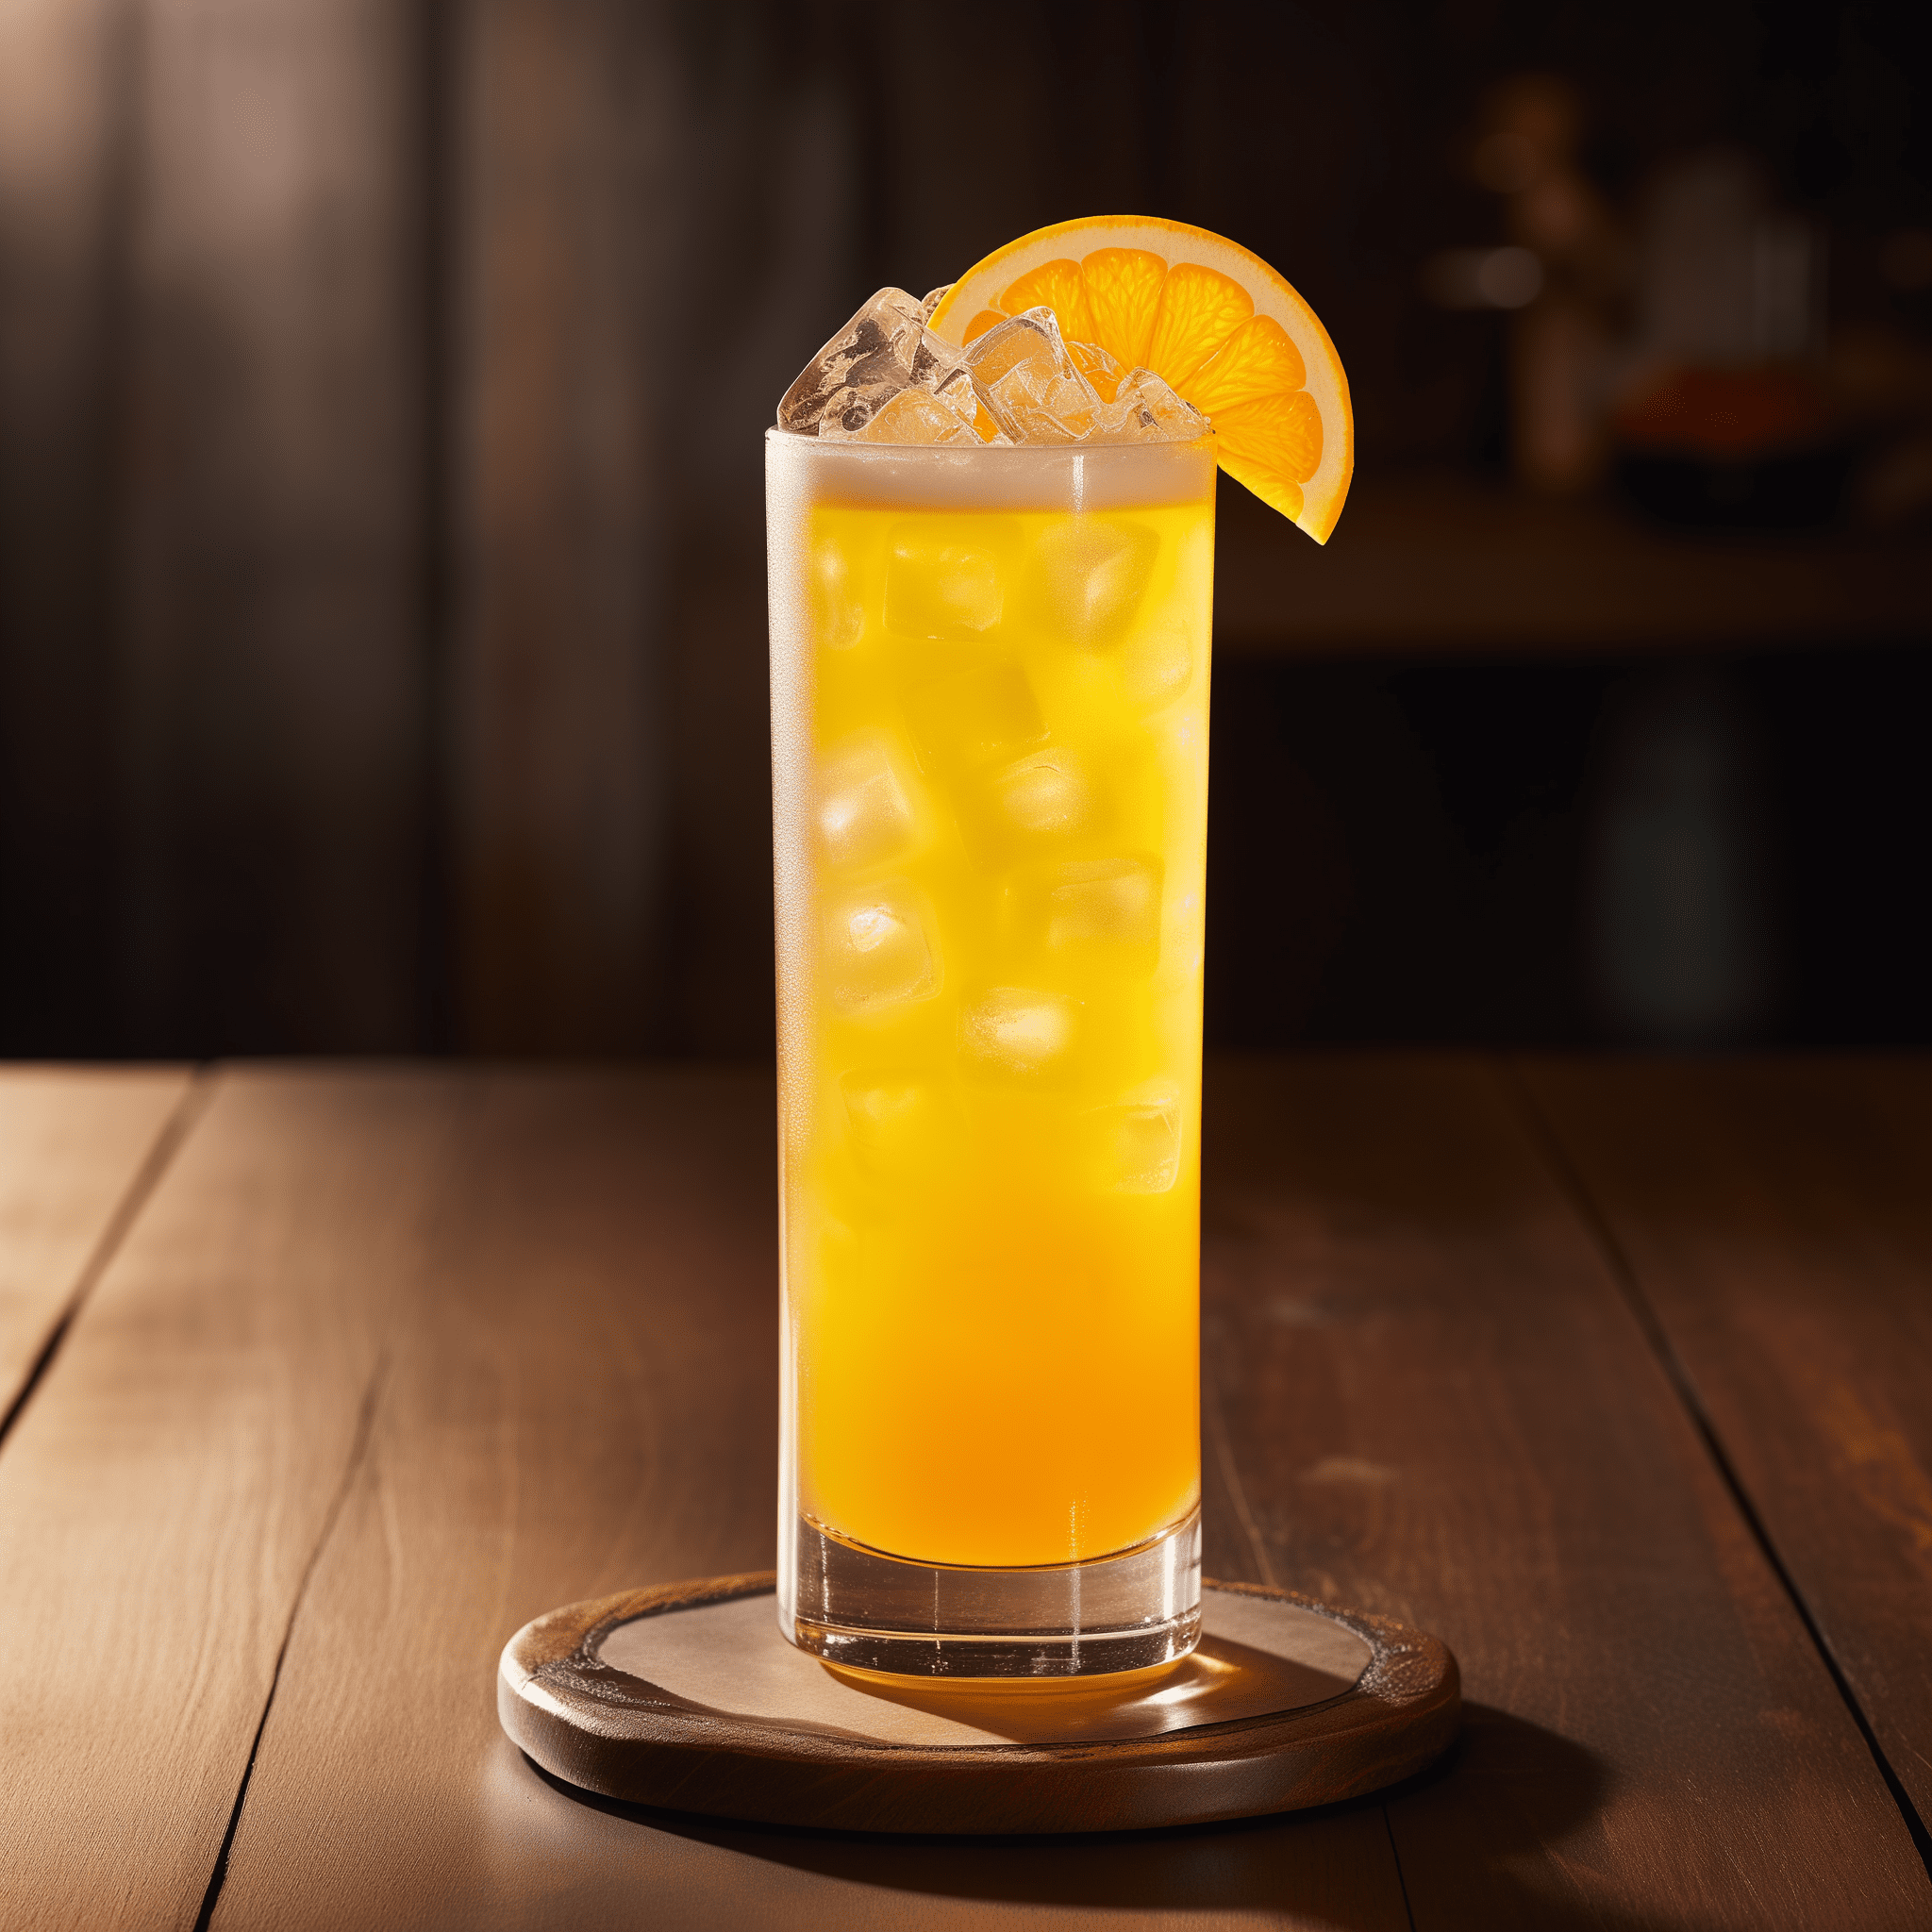 Rumosa Cocktail Recipe - The Rumosa offers a refreshing, citrusy flavor profile with a light rum kick. It's slightly sweet from the orange juice, with a subtle effervescence from the soda water. The rum provides a smooth, clean finish that's neither too strong nor overpowering, making it an excellent choice for a daytime drink.